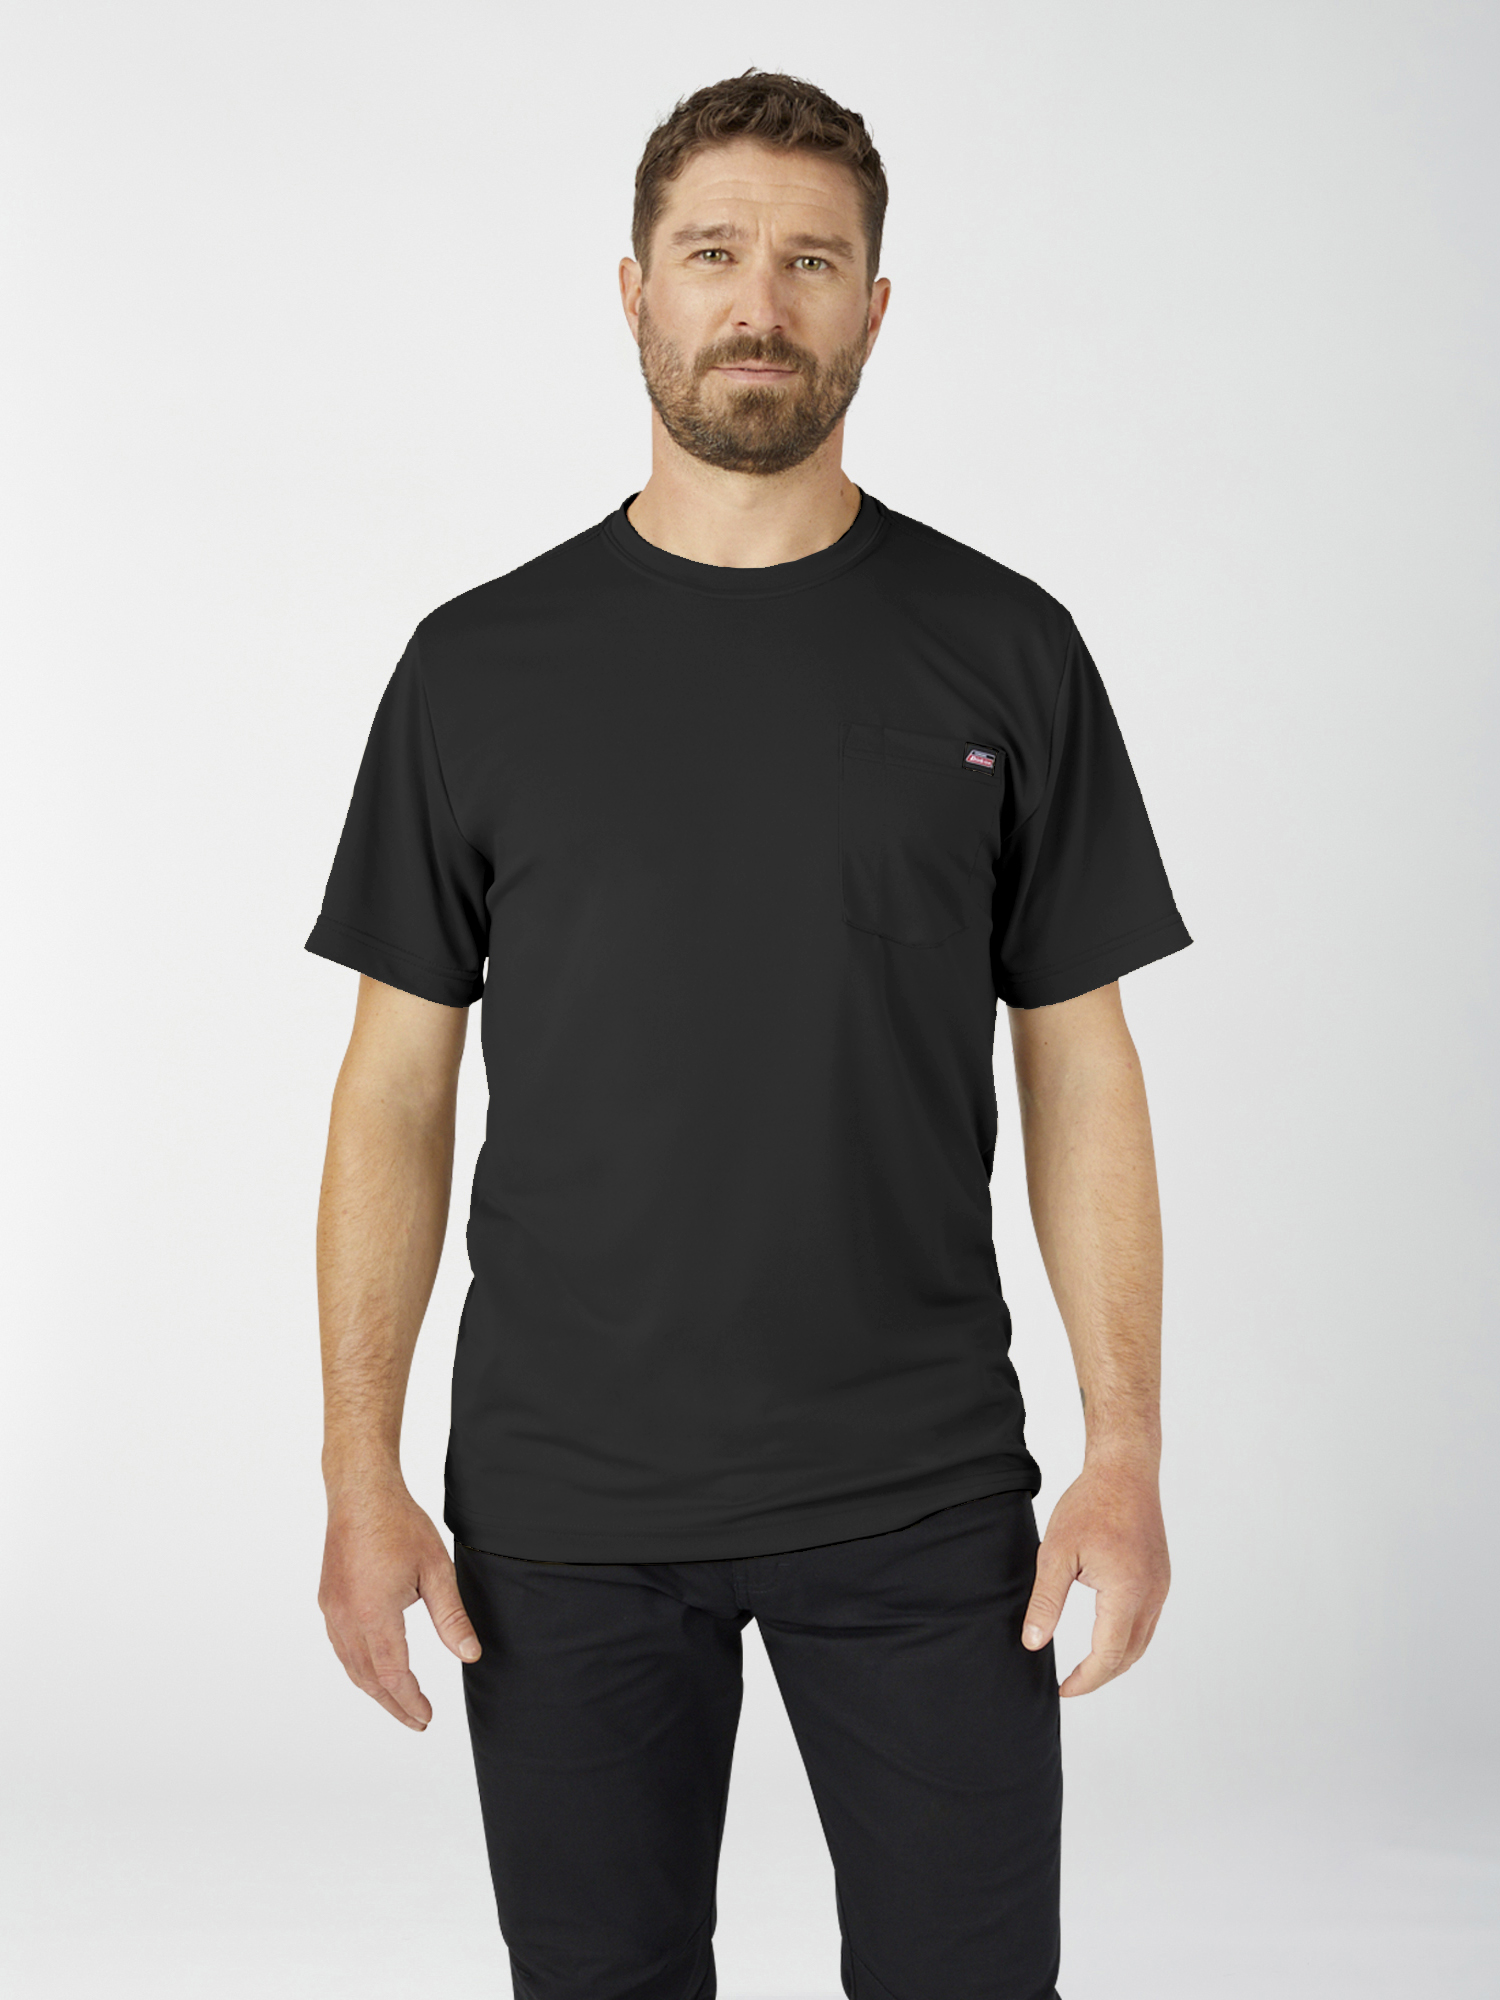 Genuine Dickies Men's Relaxed Fit Performance Polyester Tee Shirt ...